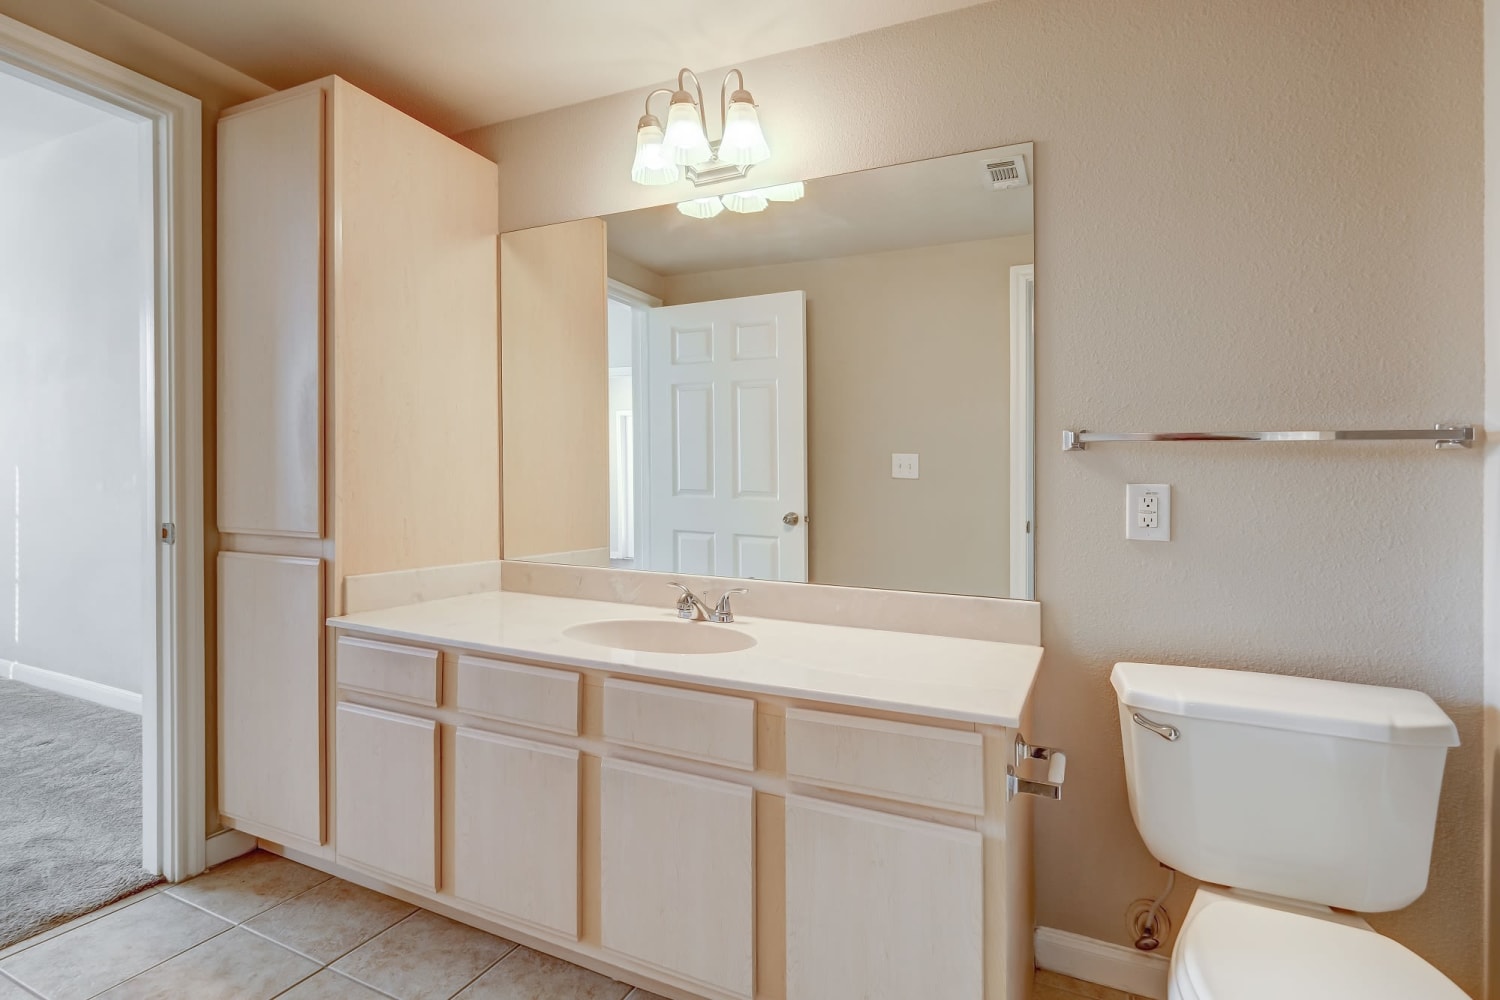 Bright bathroom at Chateau des Lions Apartment Homes in Lafayette, Louisiana